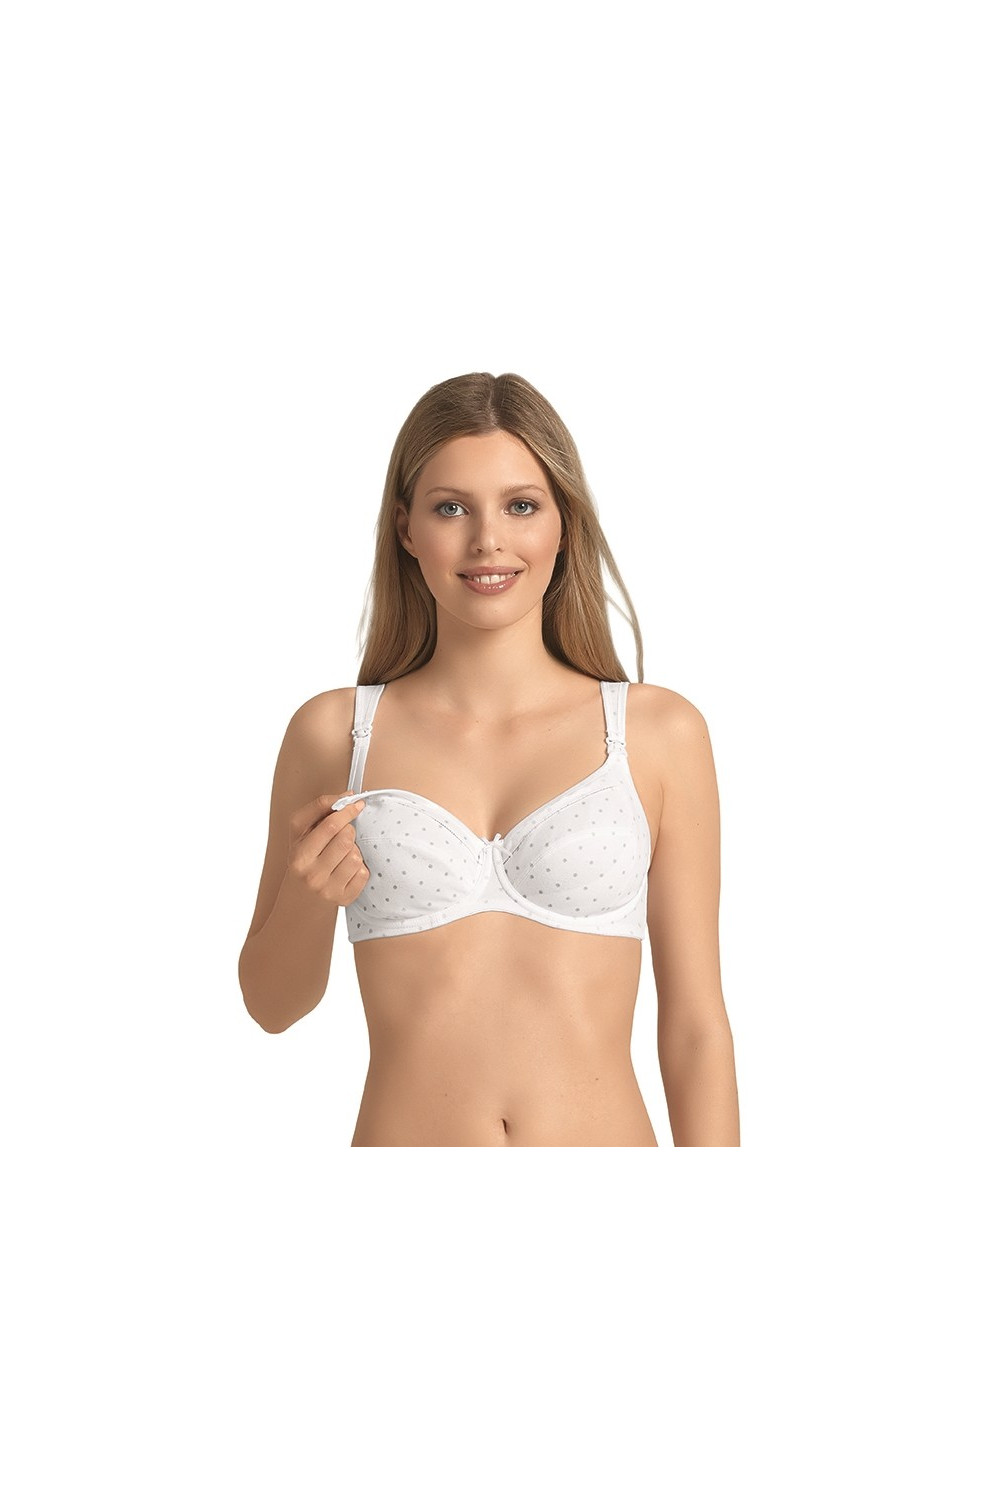 Cotton nursing bra with soft underwire that does not press the breast. Up  to J cup